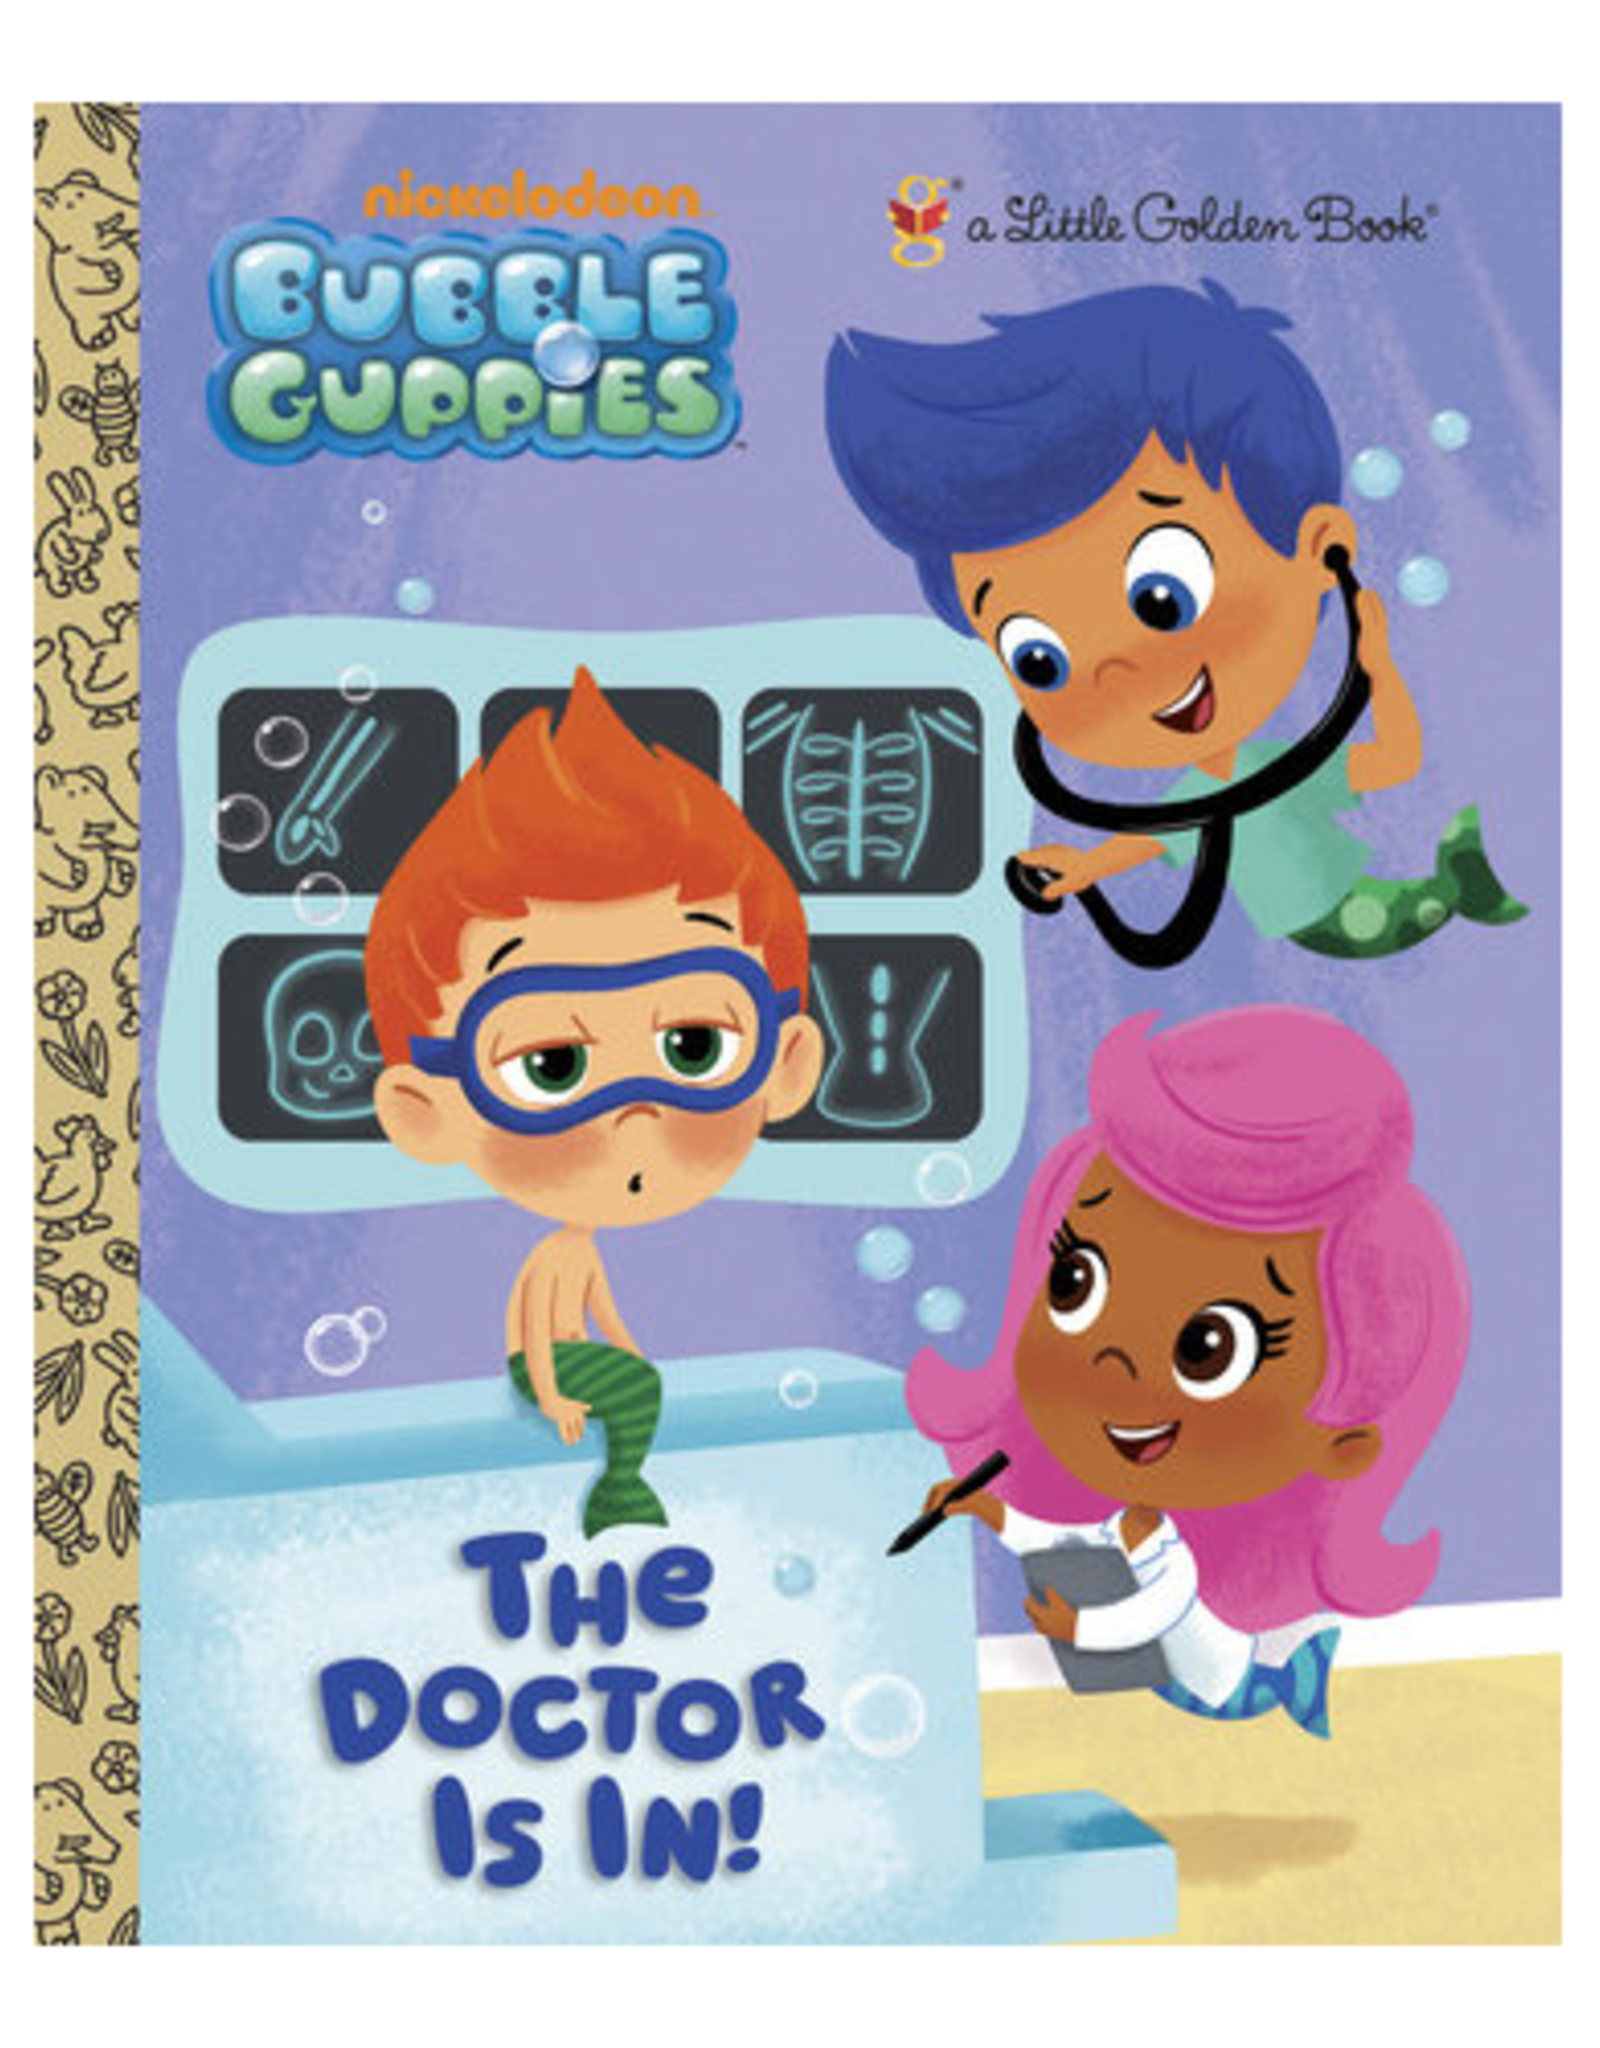 Little Golden Books Little Golden Book - Bubble Guppies - The Doctor is In